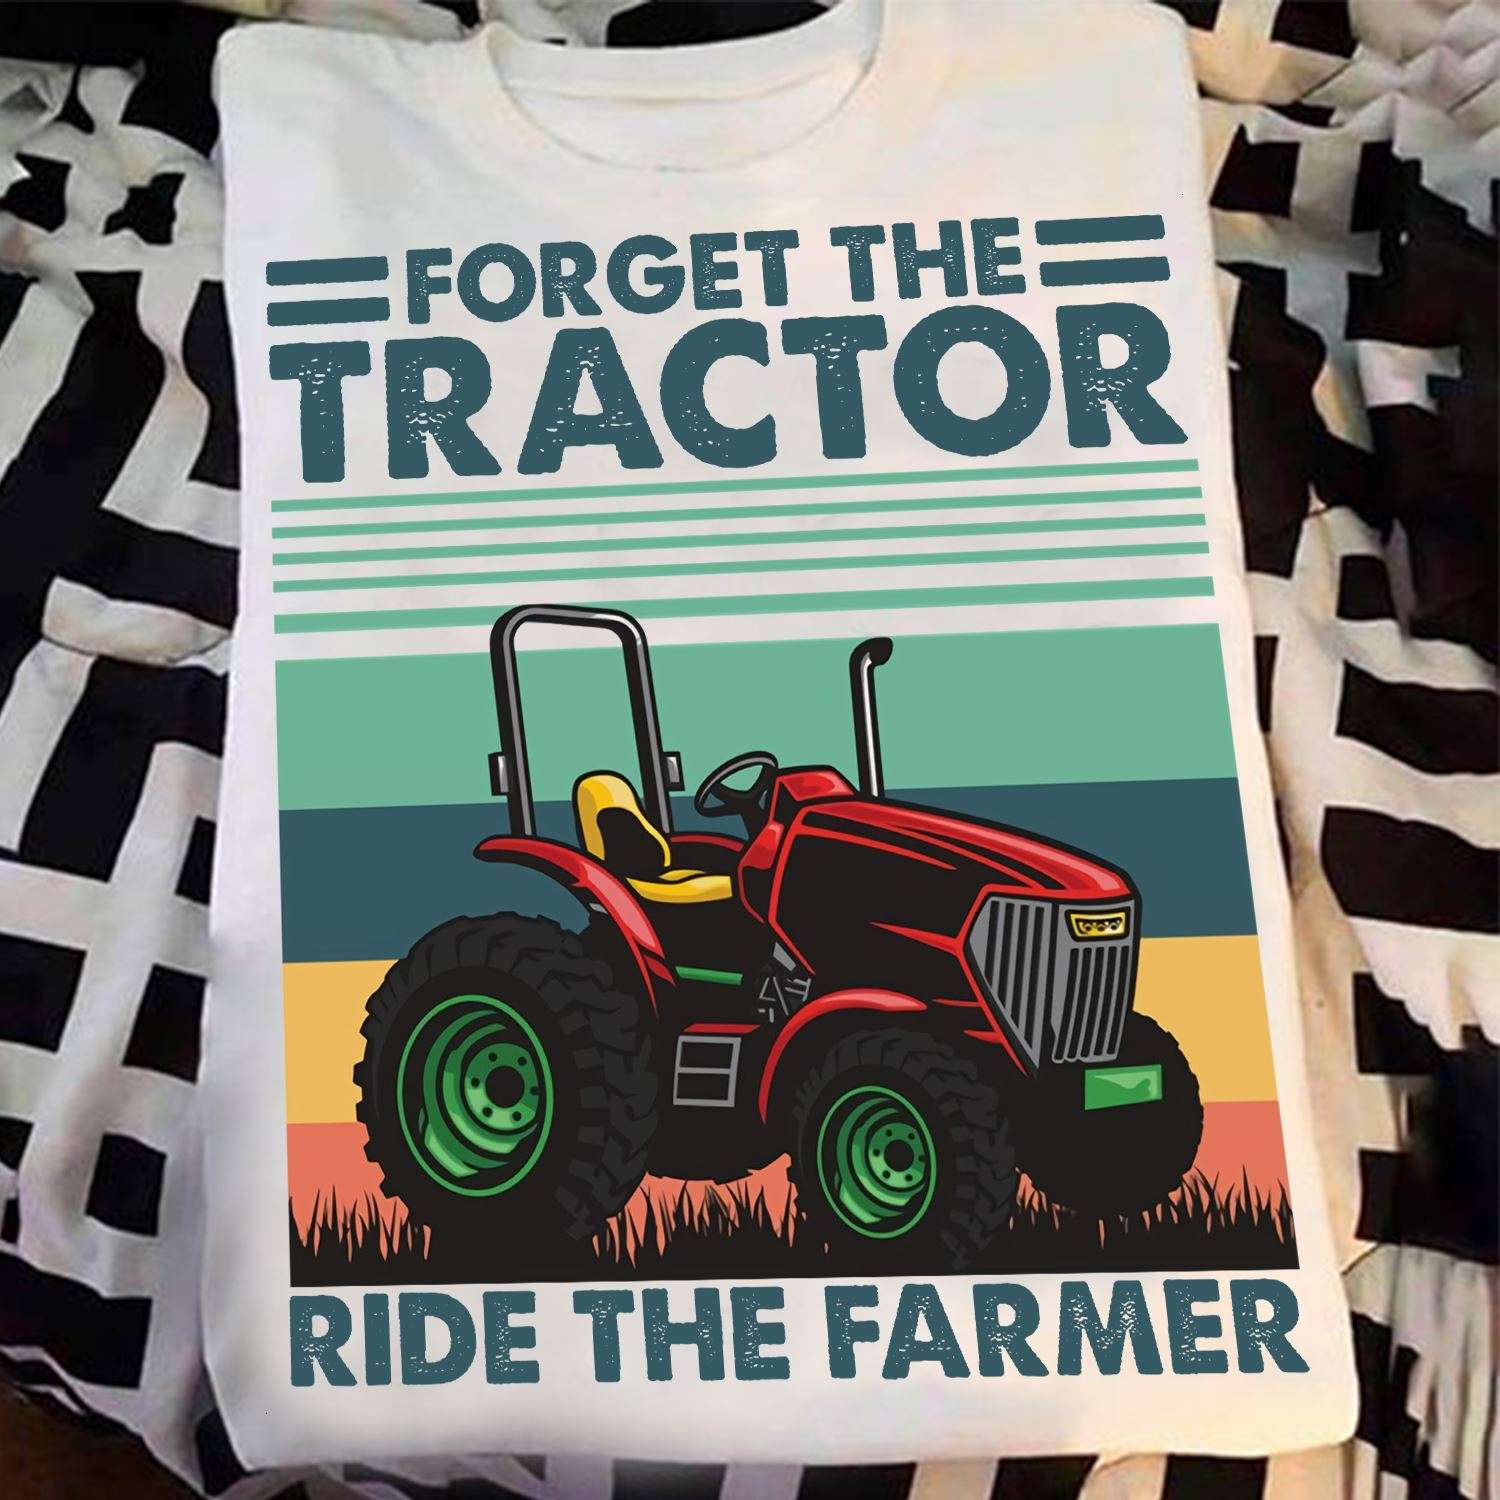 Forget the tractor ride the farmer - Tractor driver shirt